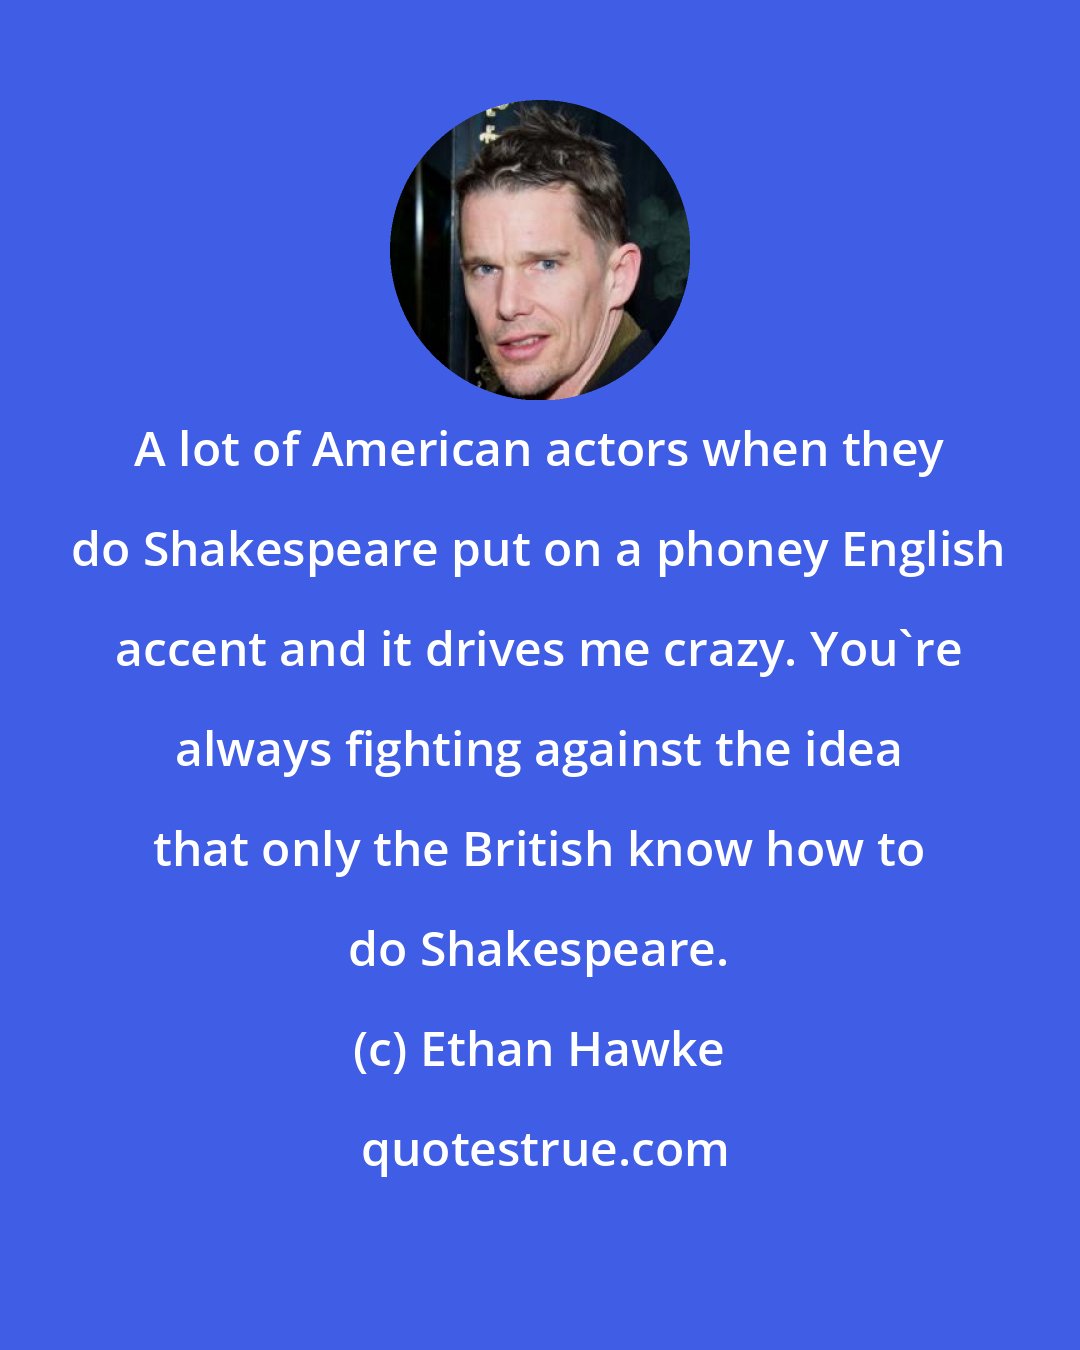 Ethan Hawke: A lot of American actors when they do Shakespeare put on a phoney English accent and it drives me crazy. You're always fighting against the idea that only the British know how to do Shakespeare.